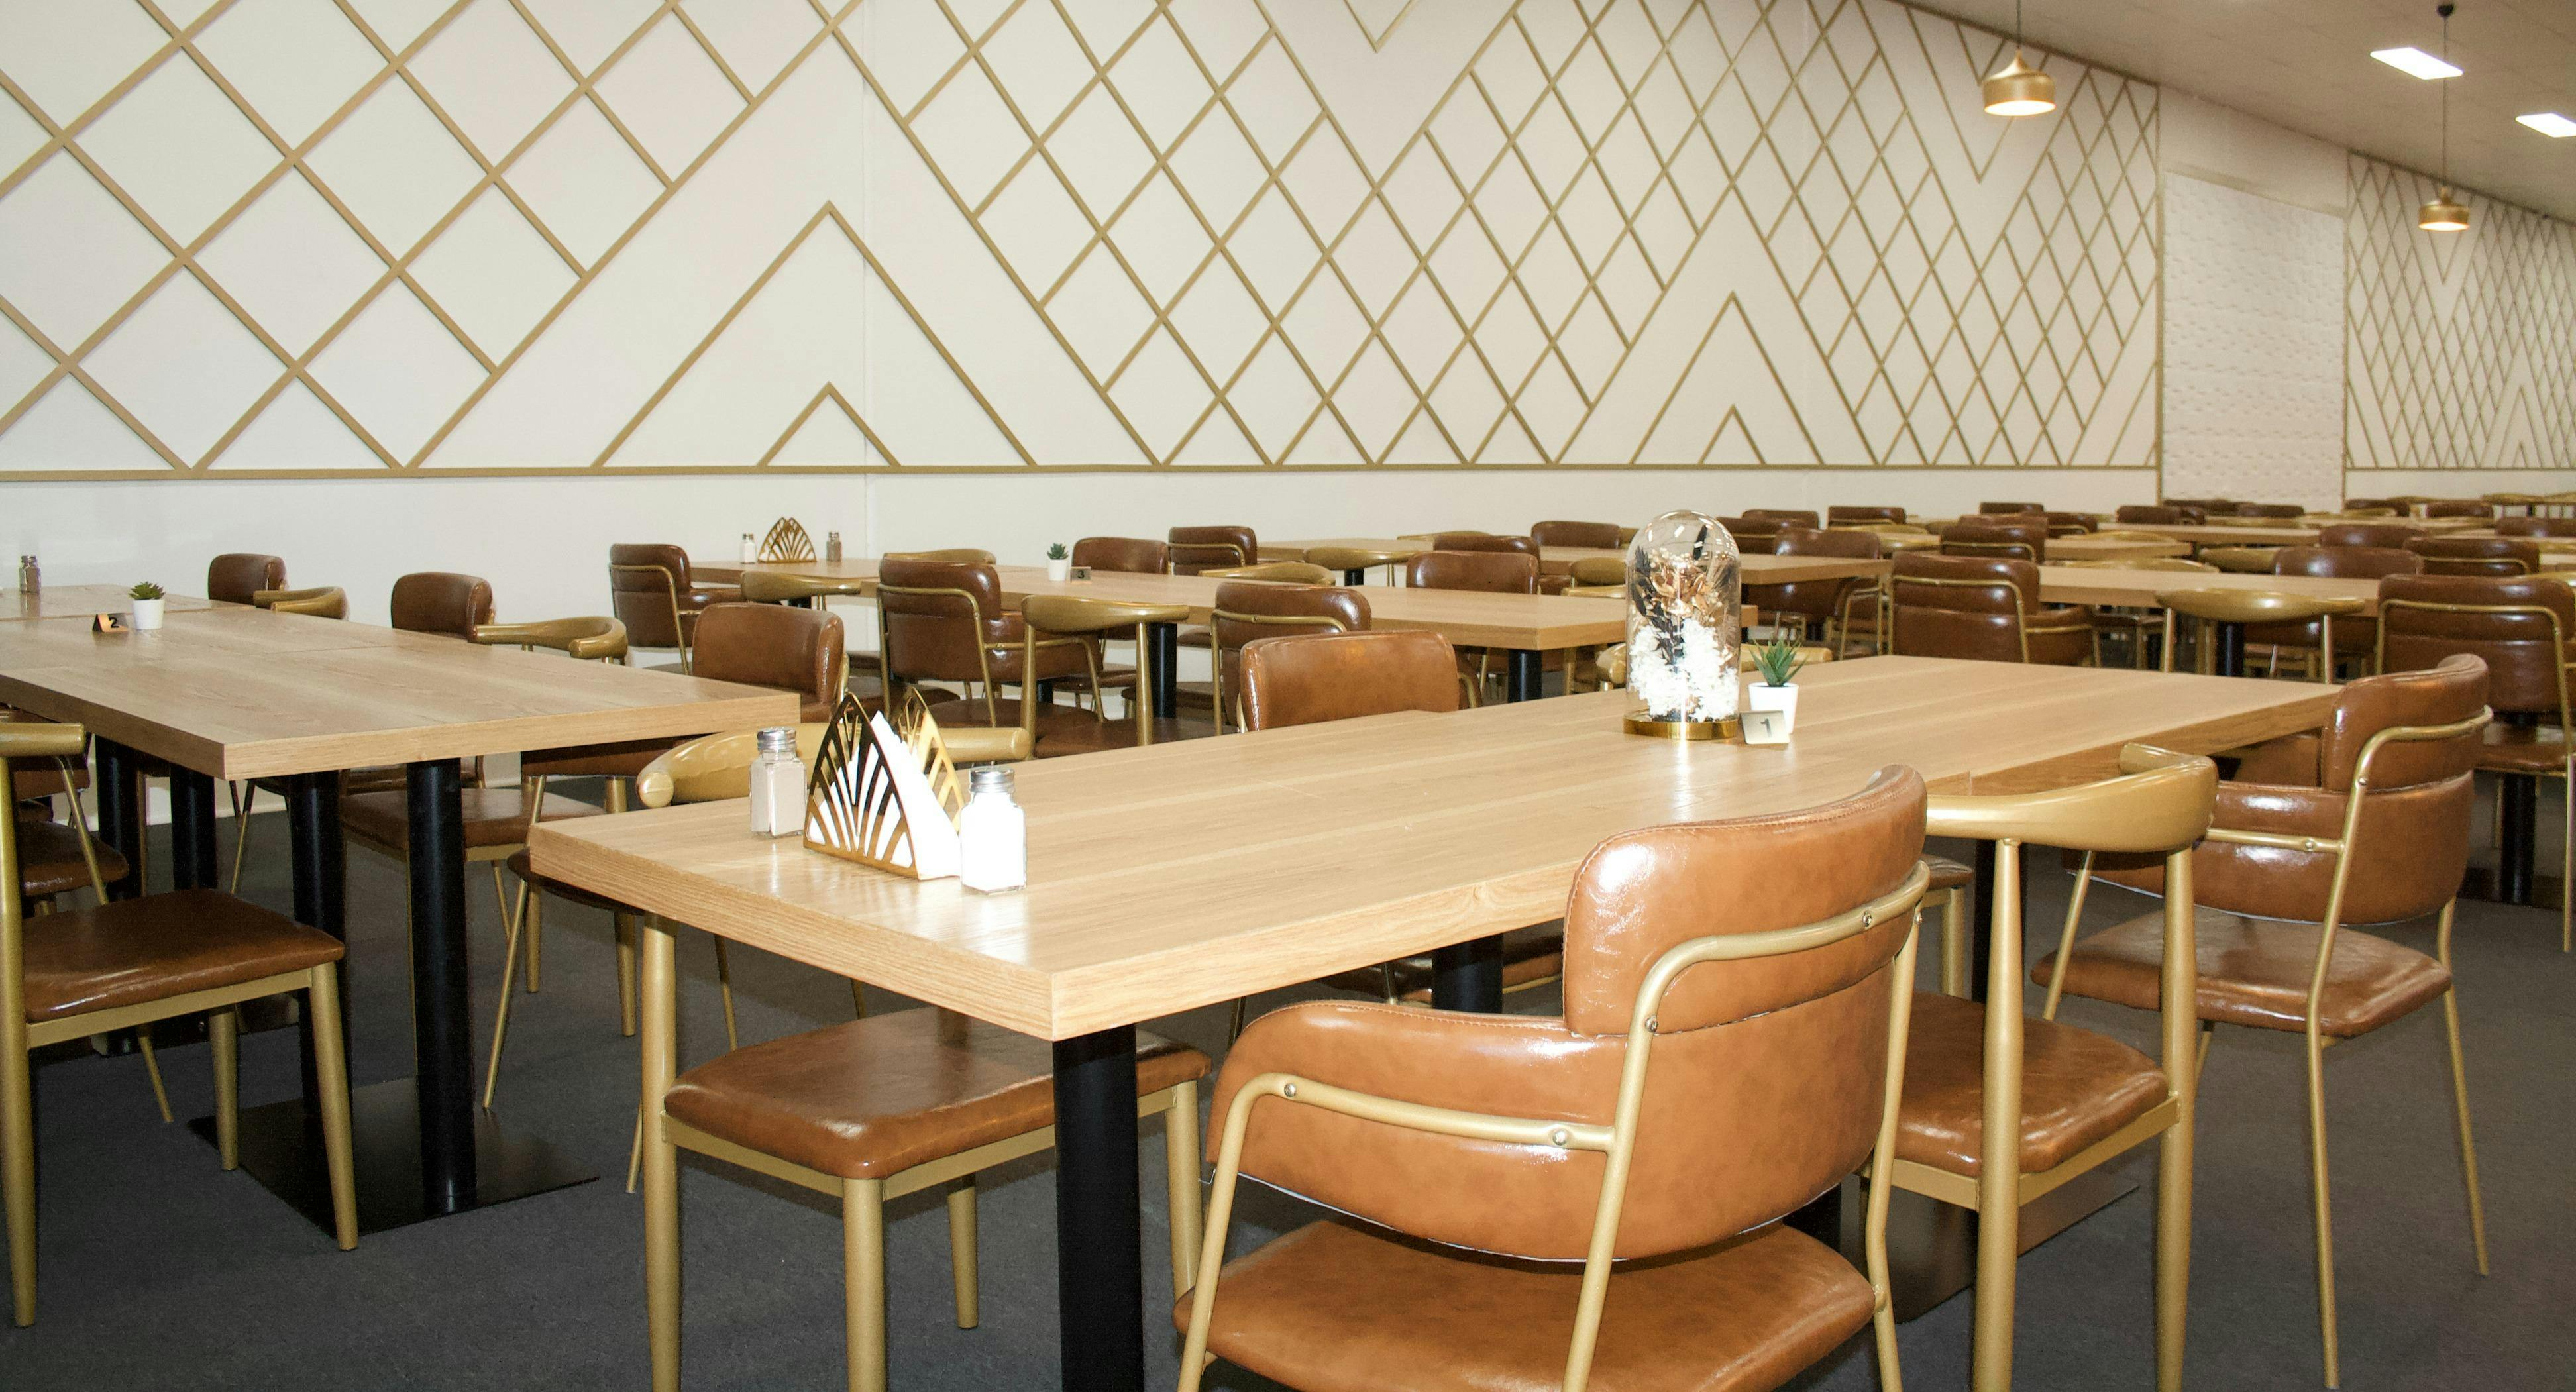 Photo of restaurant 7 Star Buffet in Coolaroo, Melbourne